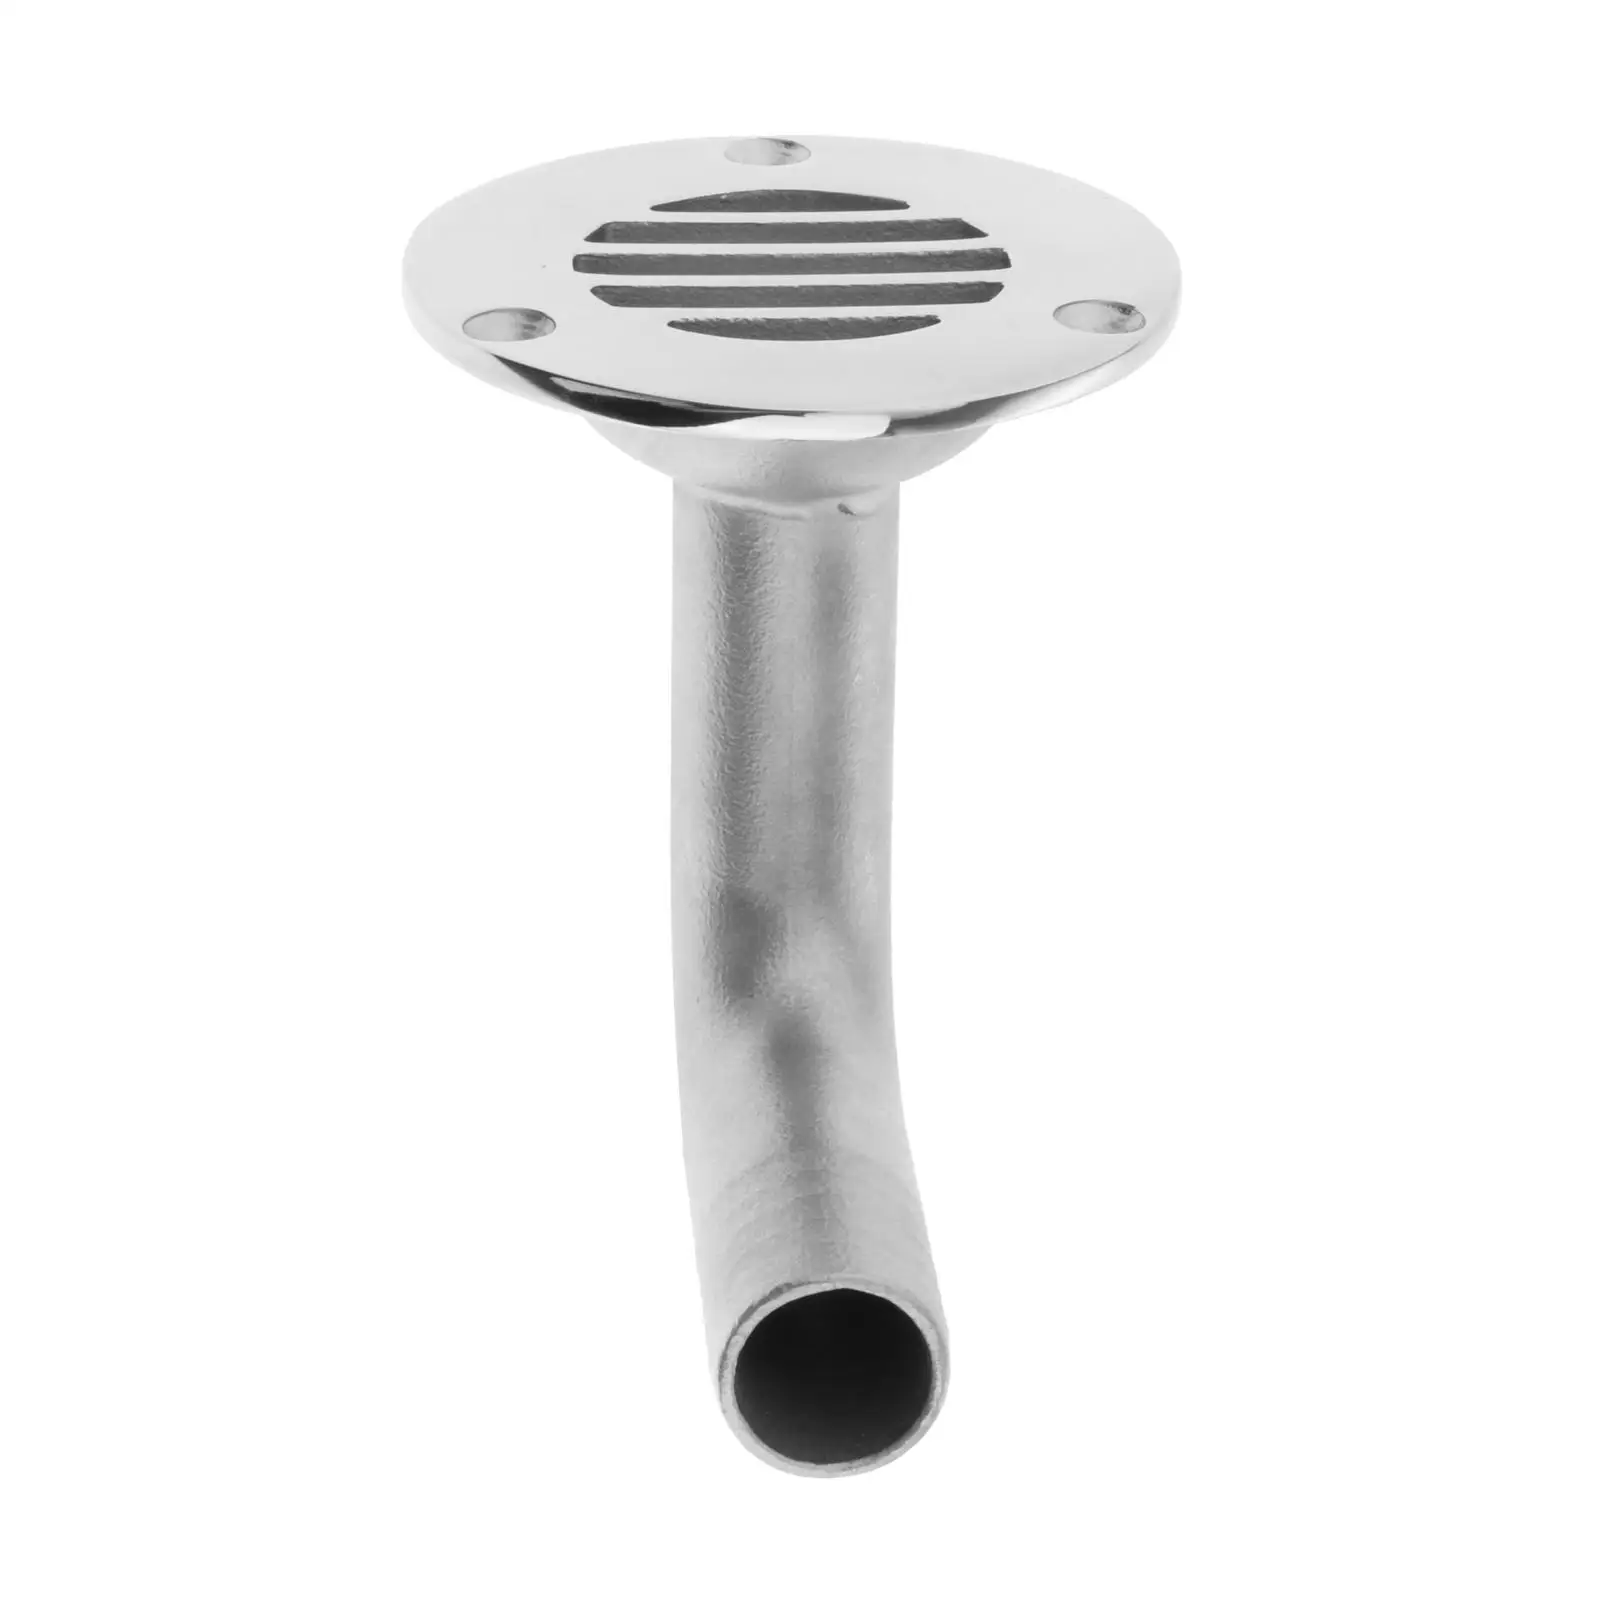 Deck Floor Drain Scupper - Marine Grade Stainless Steel - for Boat & Fishing Ship - 3/4 inch, Easy to Install